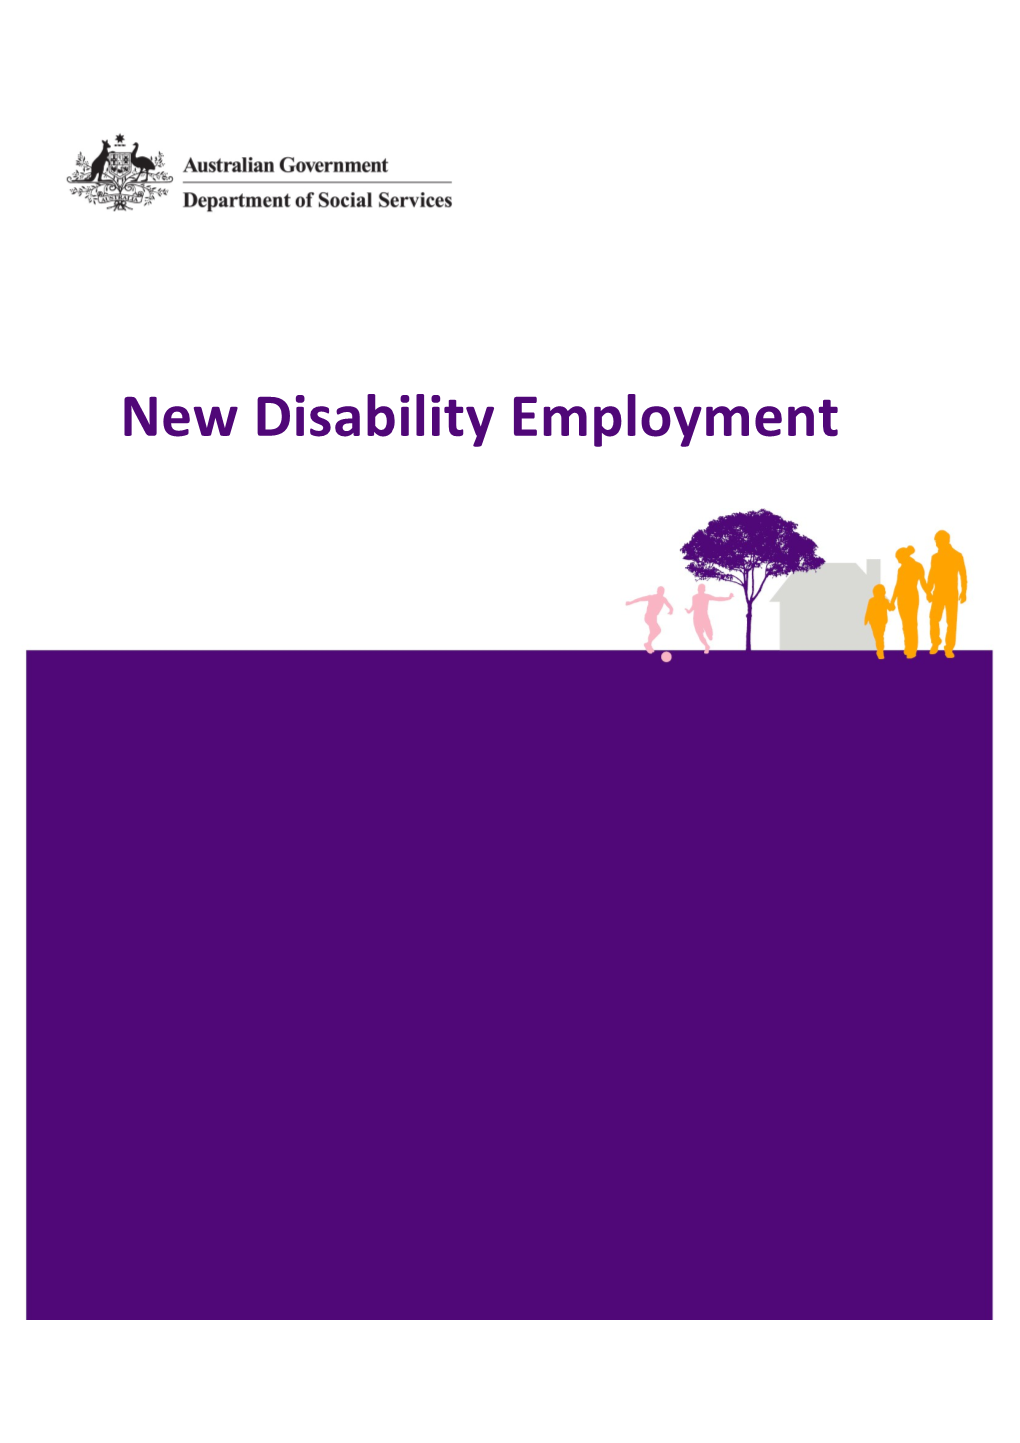 New Disability Employment Services from 2018 Discussion Paper